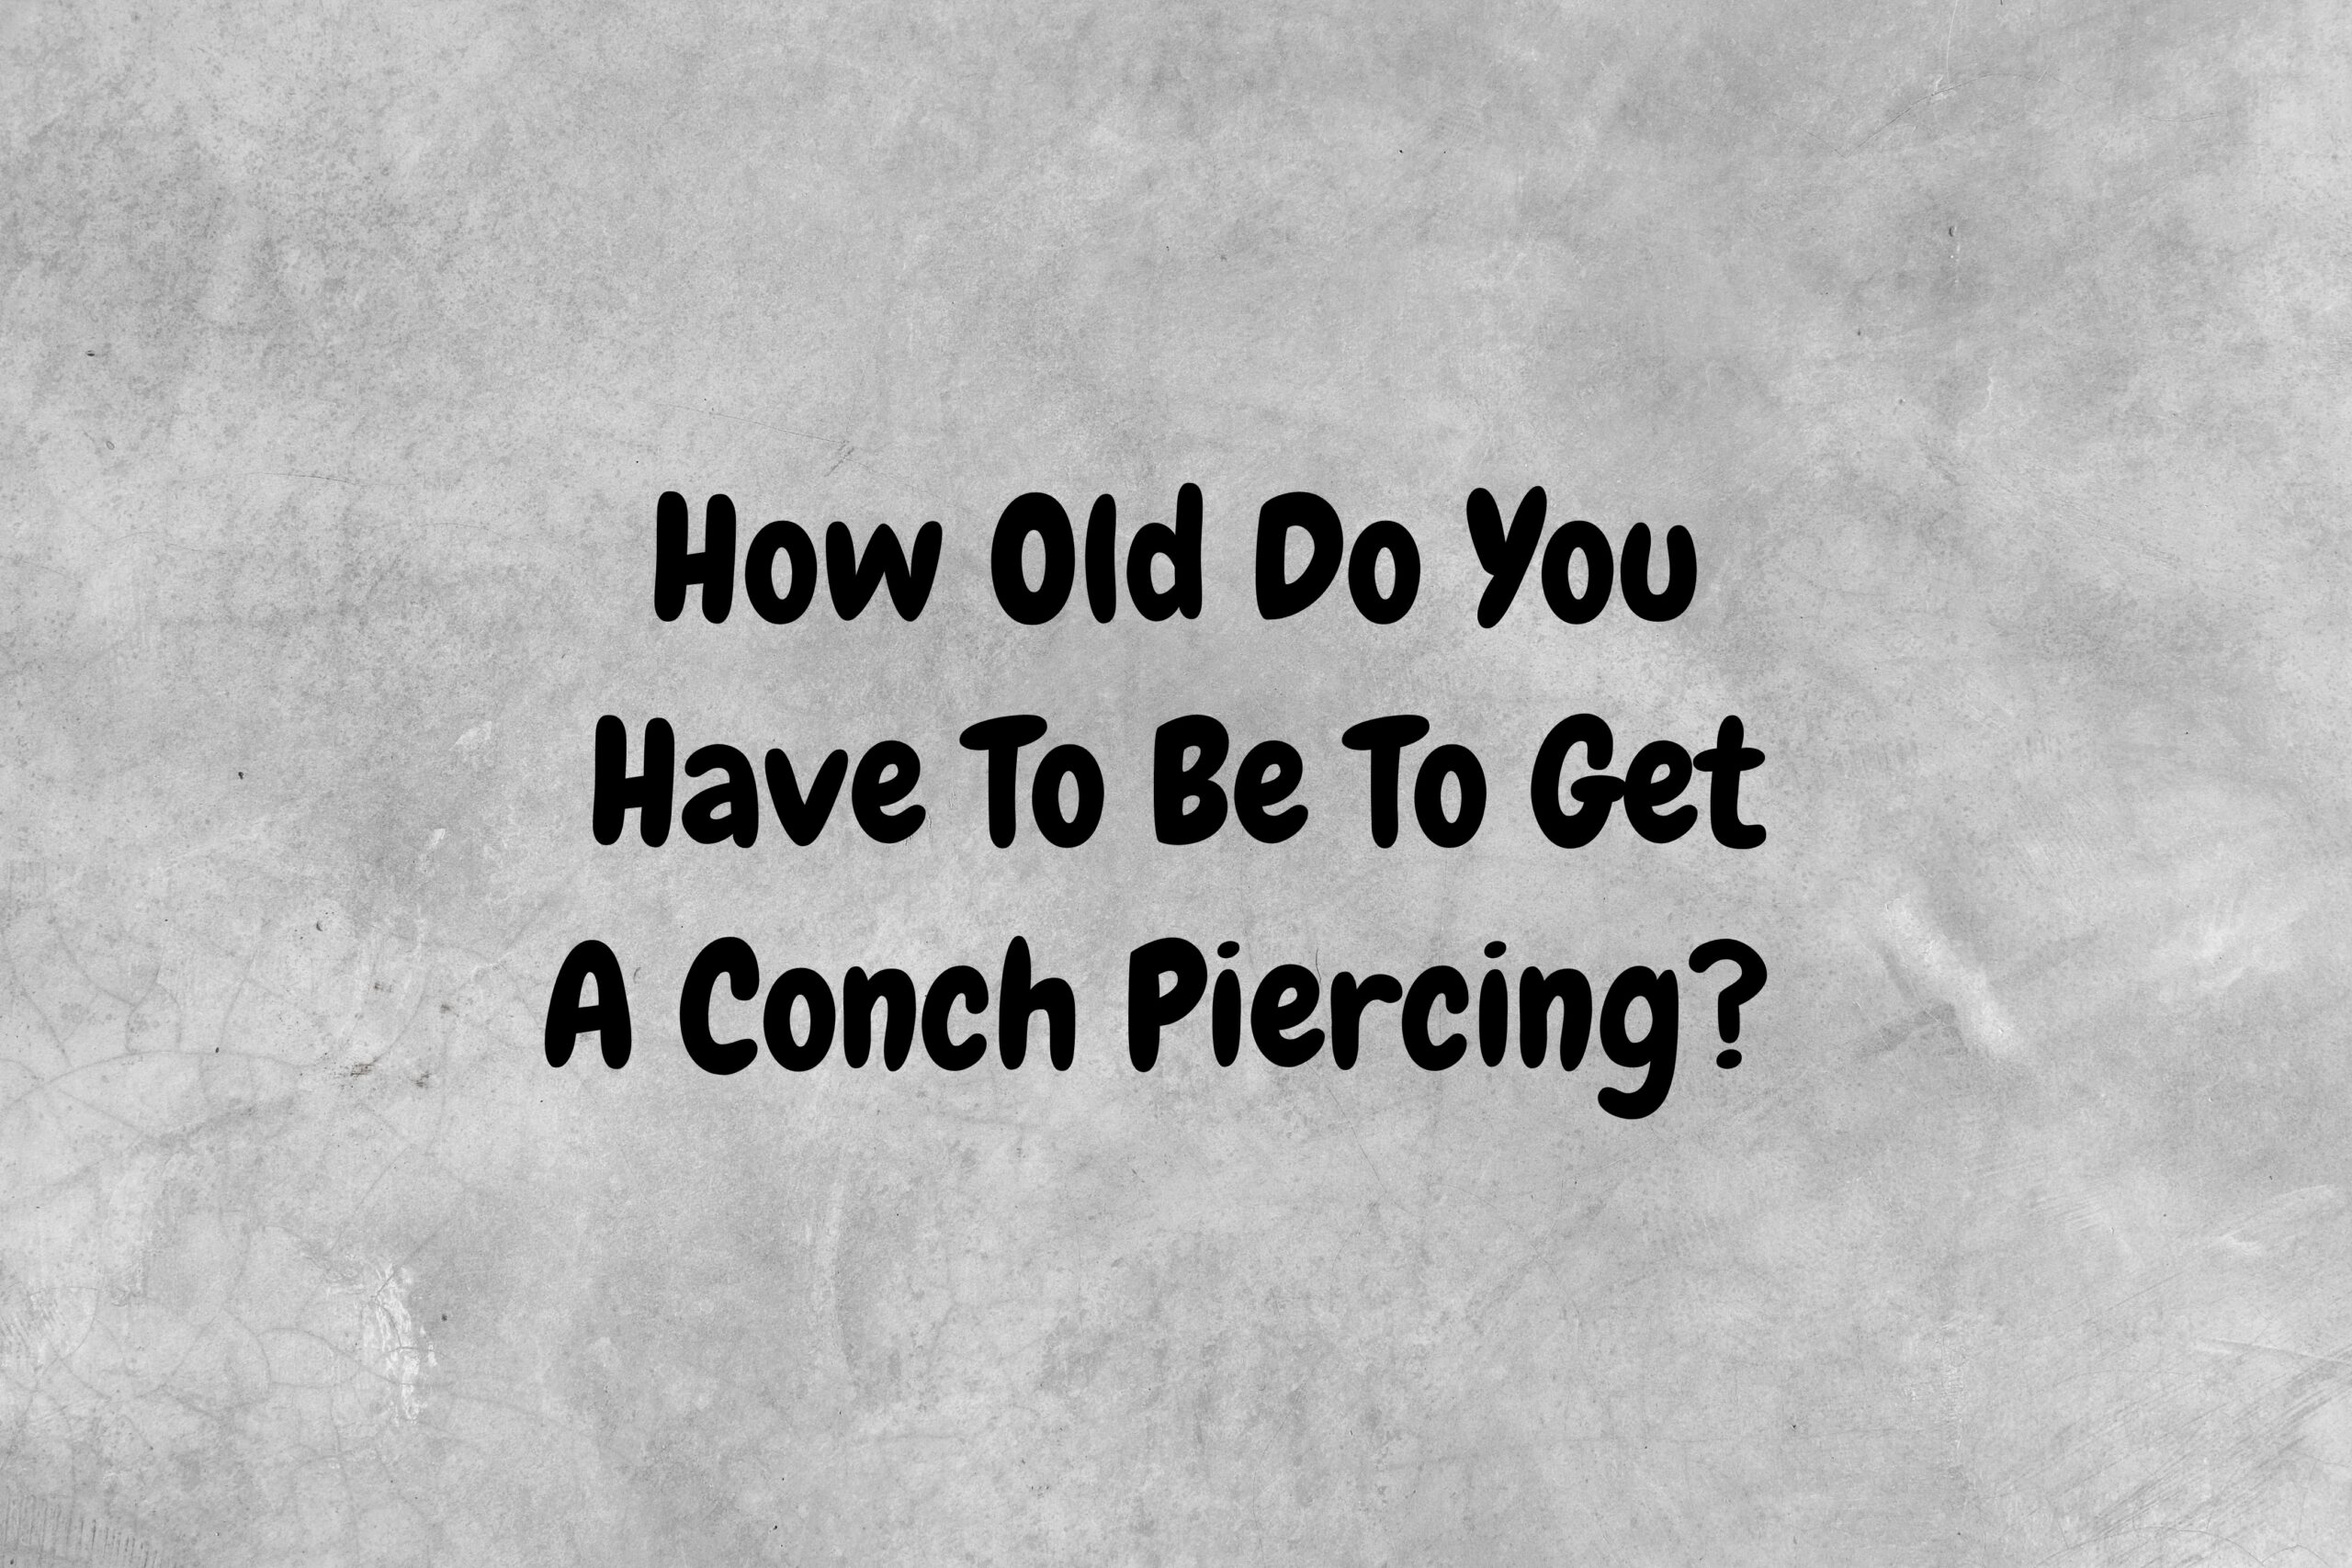 An image with a gray background and black text asking the question, "How old do you have to be to get a conch piercing?"